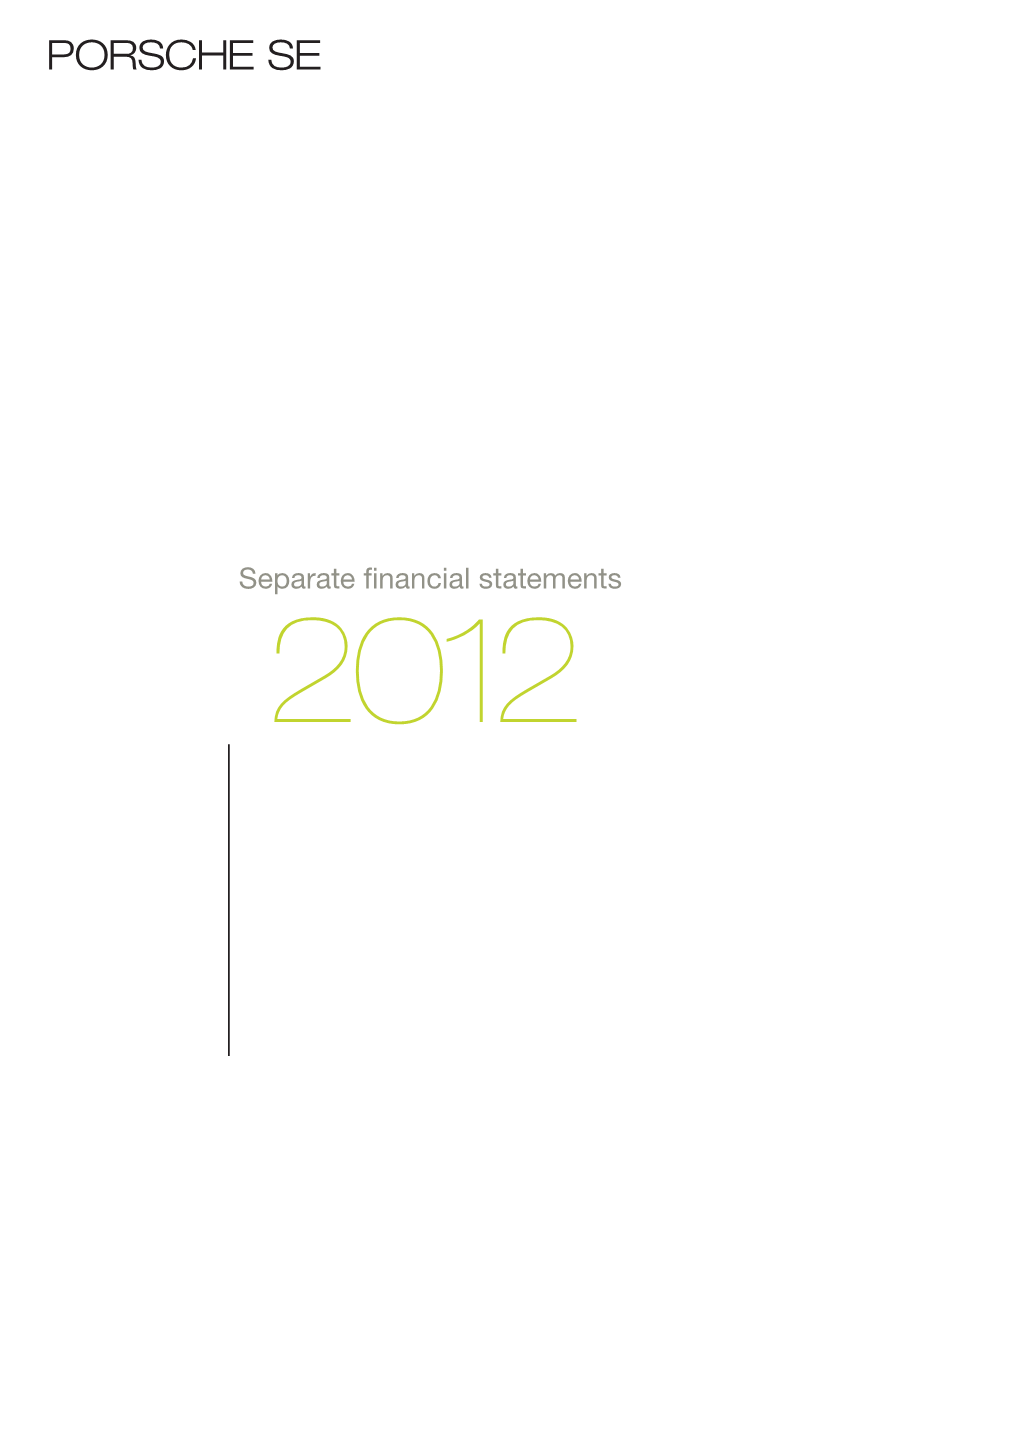 Separate Financial Statements